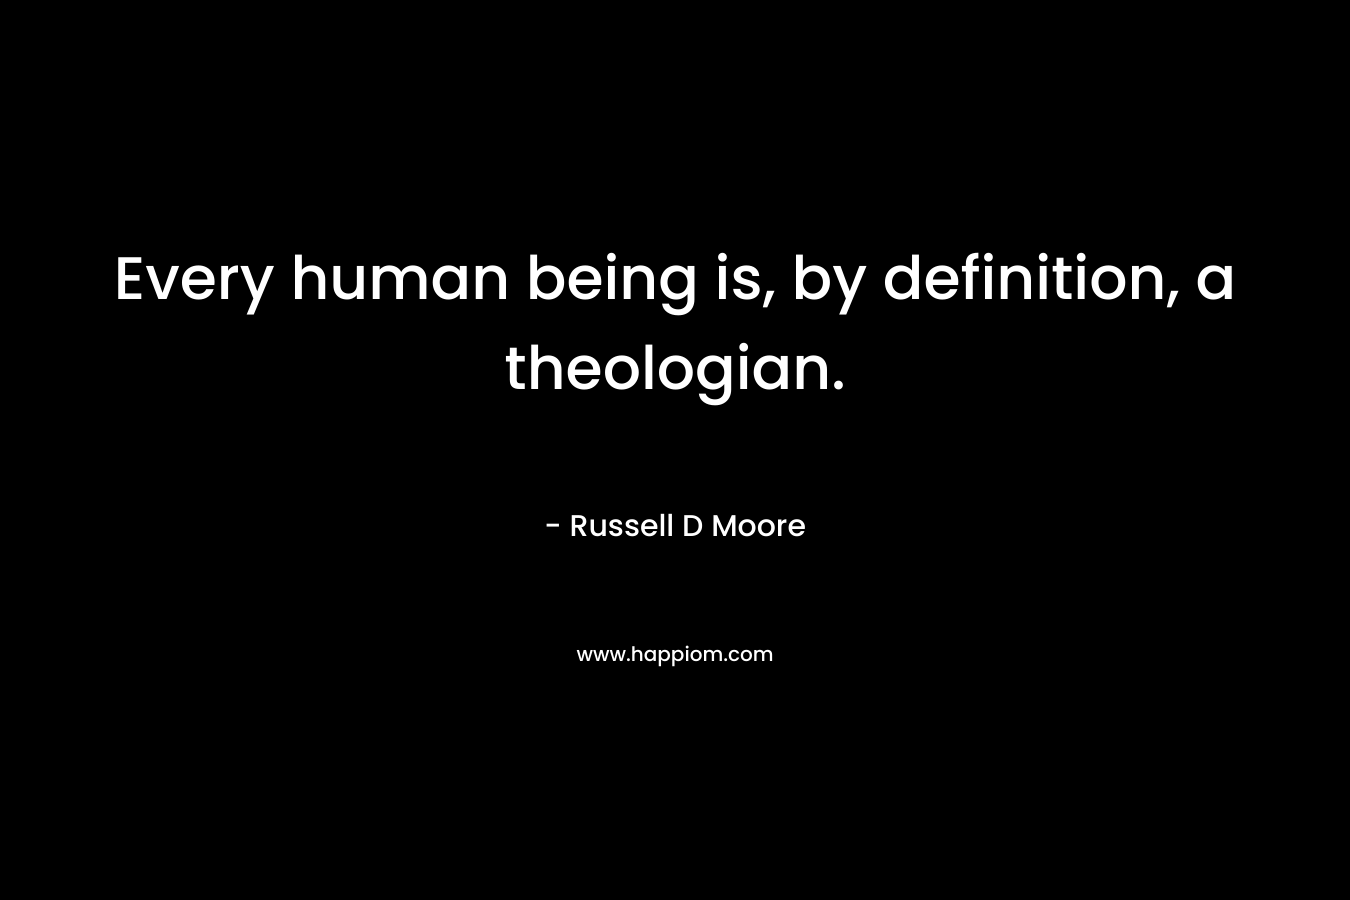 Every human being is, by definition, a theologian. – Russell D Moore